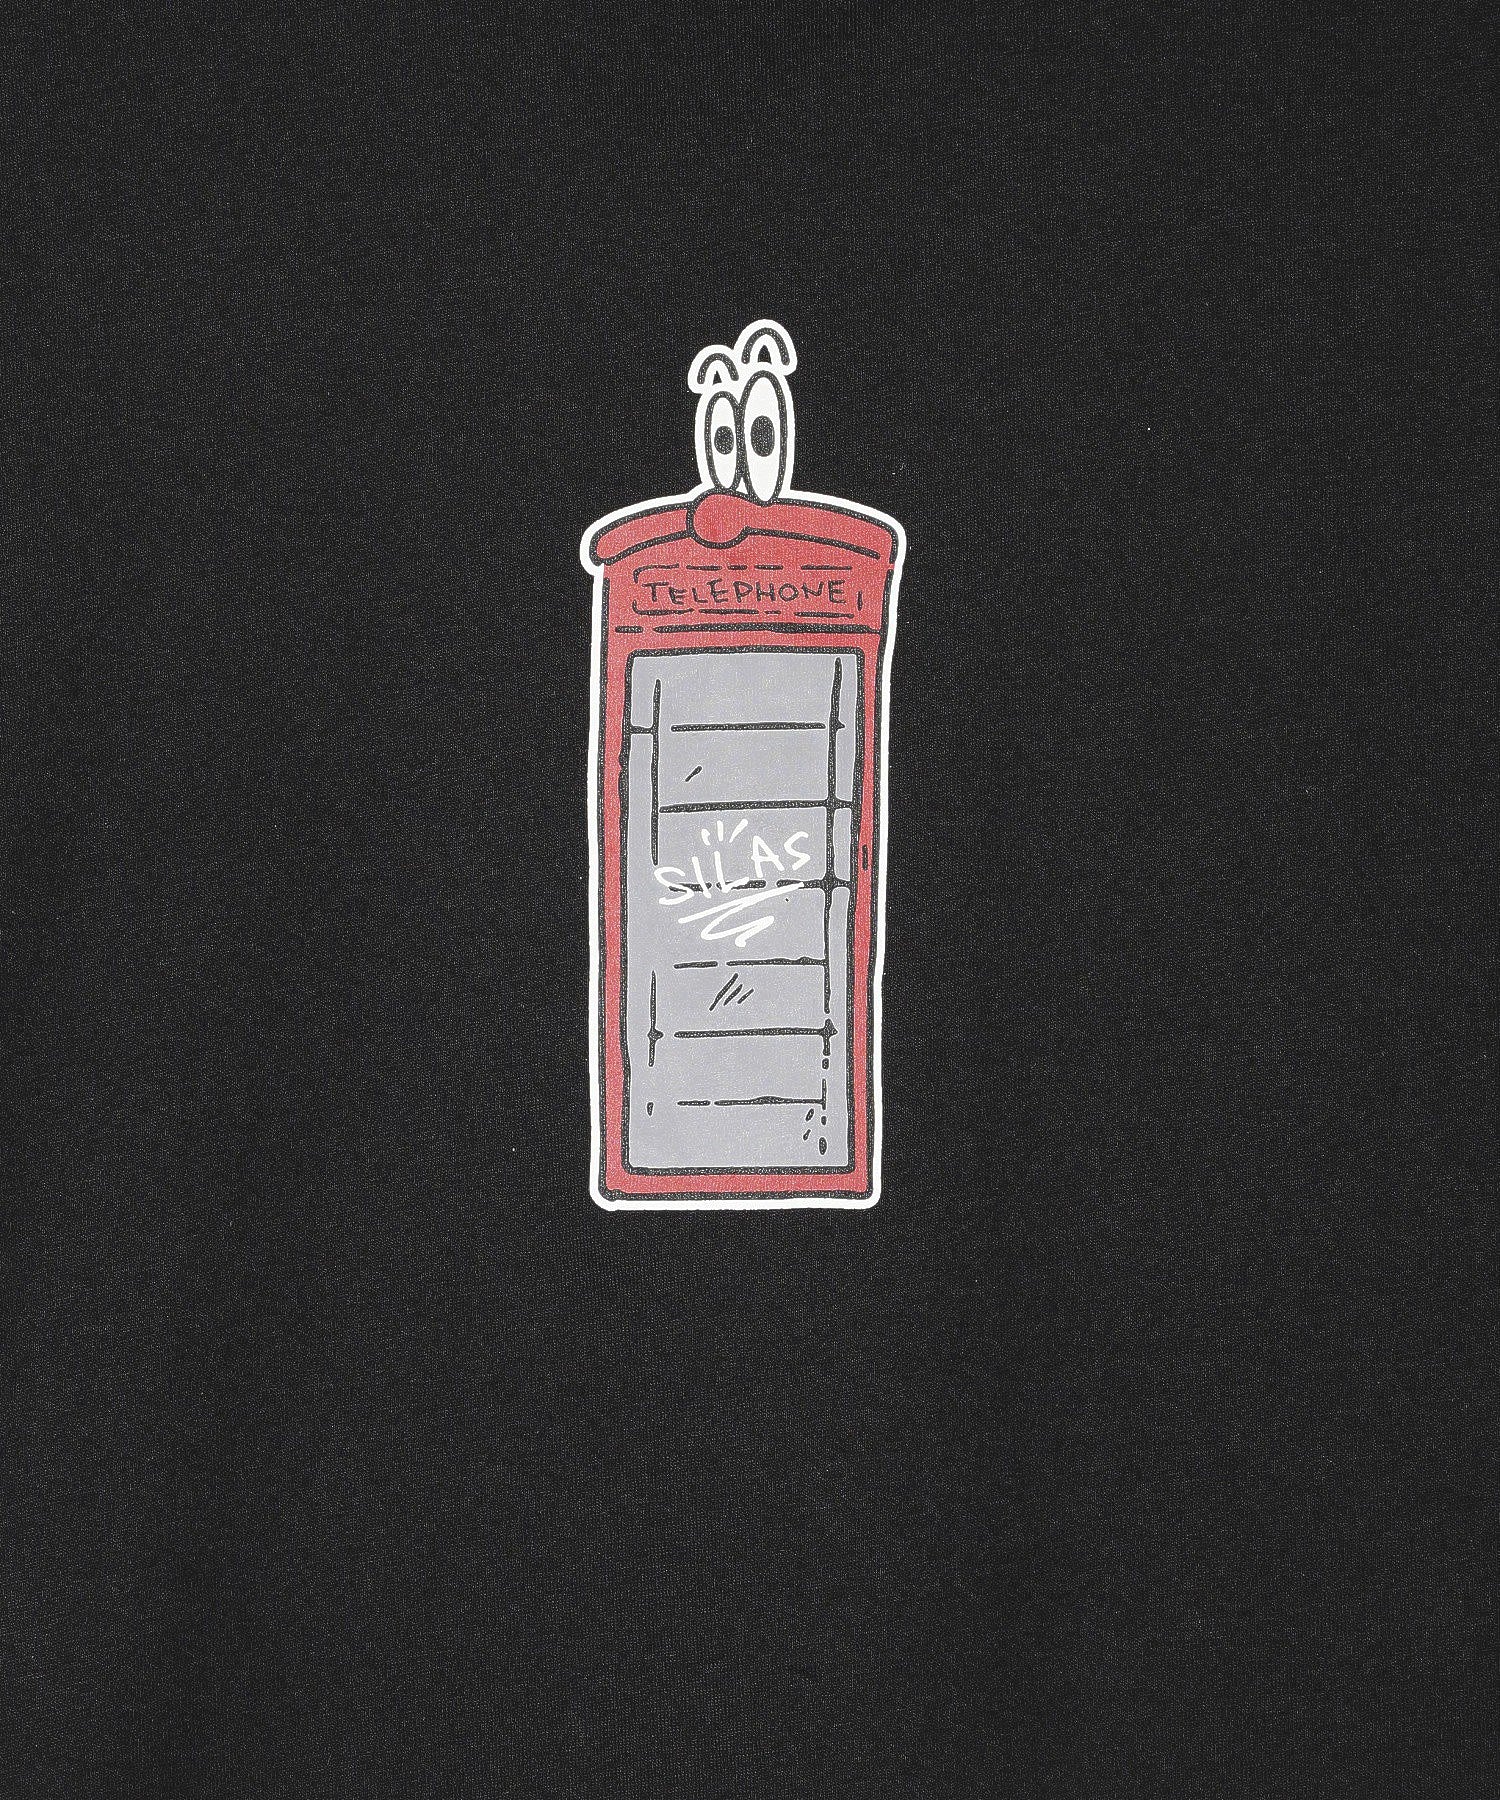 SILASxMAW PHONE BOOTH S/S TEE